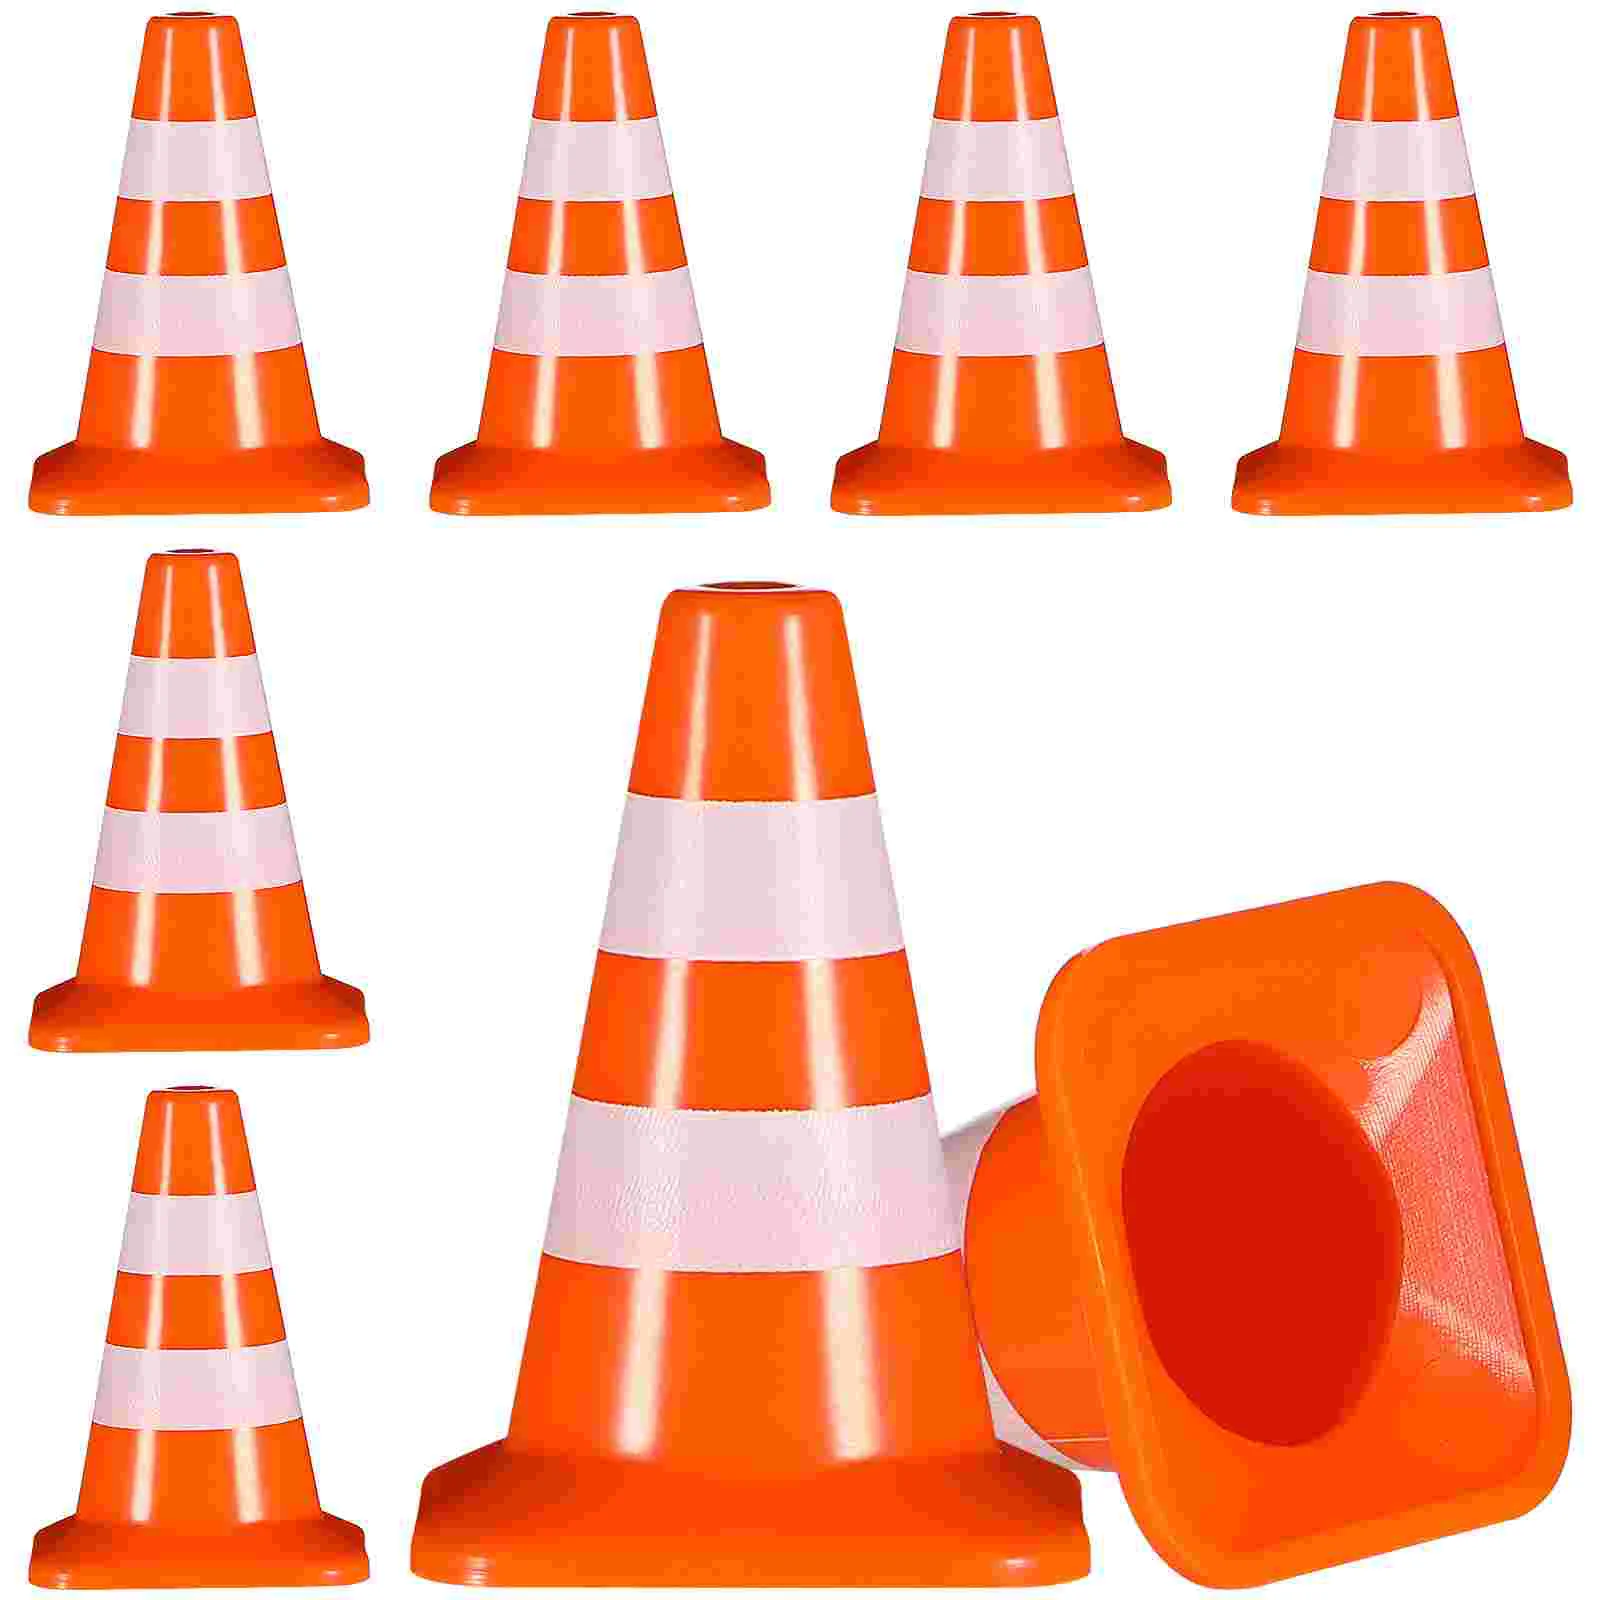 

7 Pcs Roadblock Sand Table Model Miniature Traffic Cones Small Signs Plastic Toys Construction Abs Ornaments Baby Child